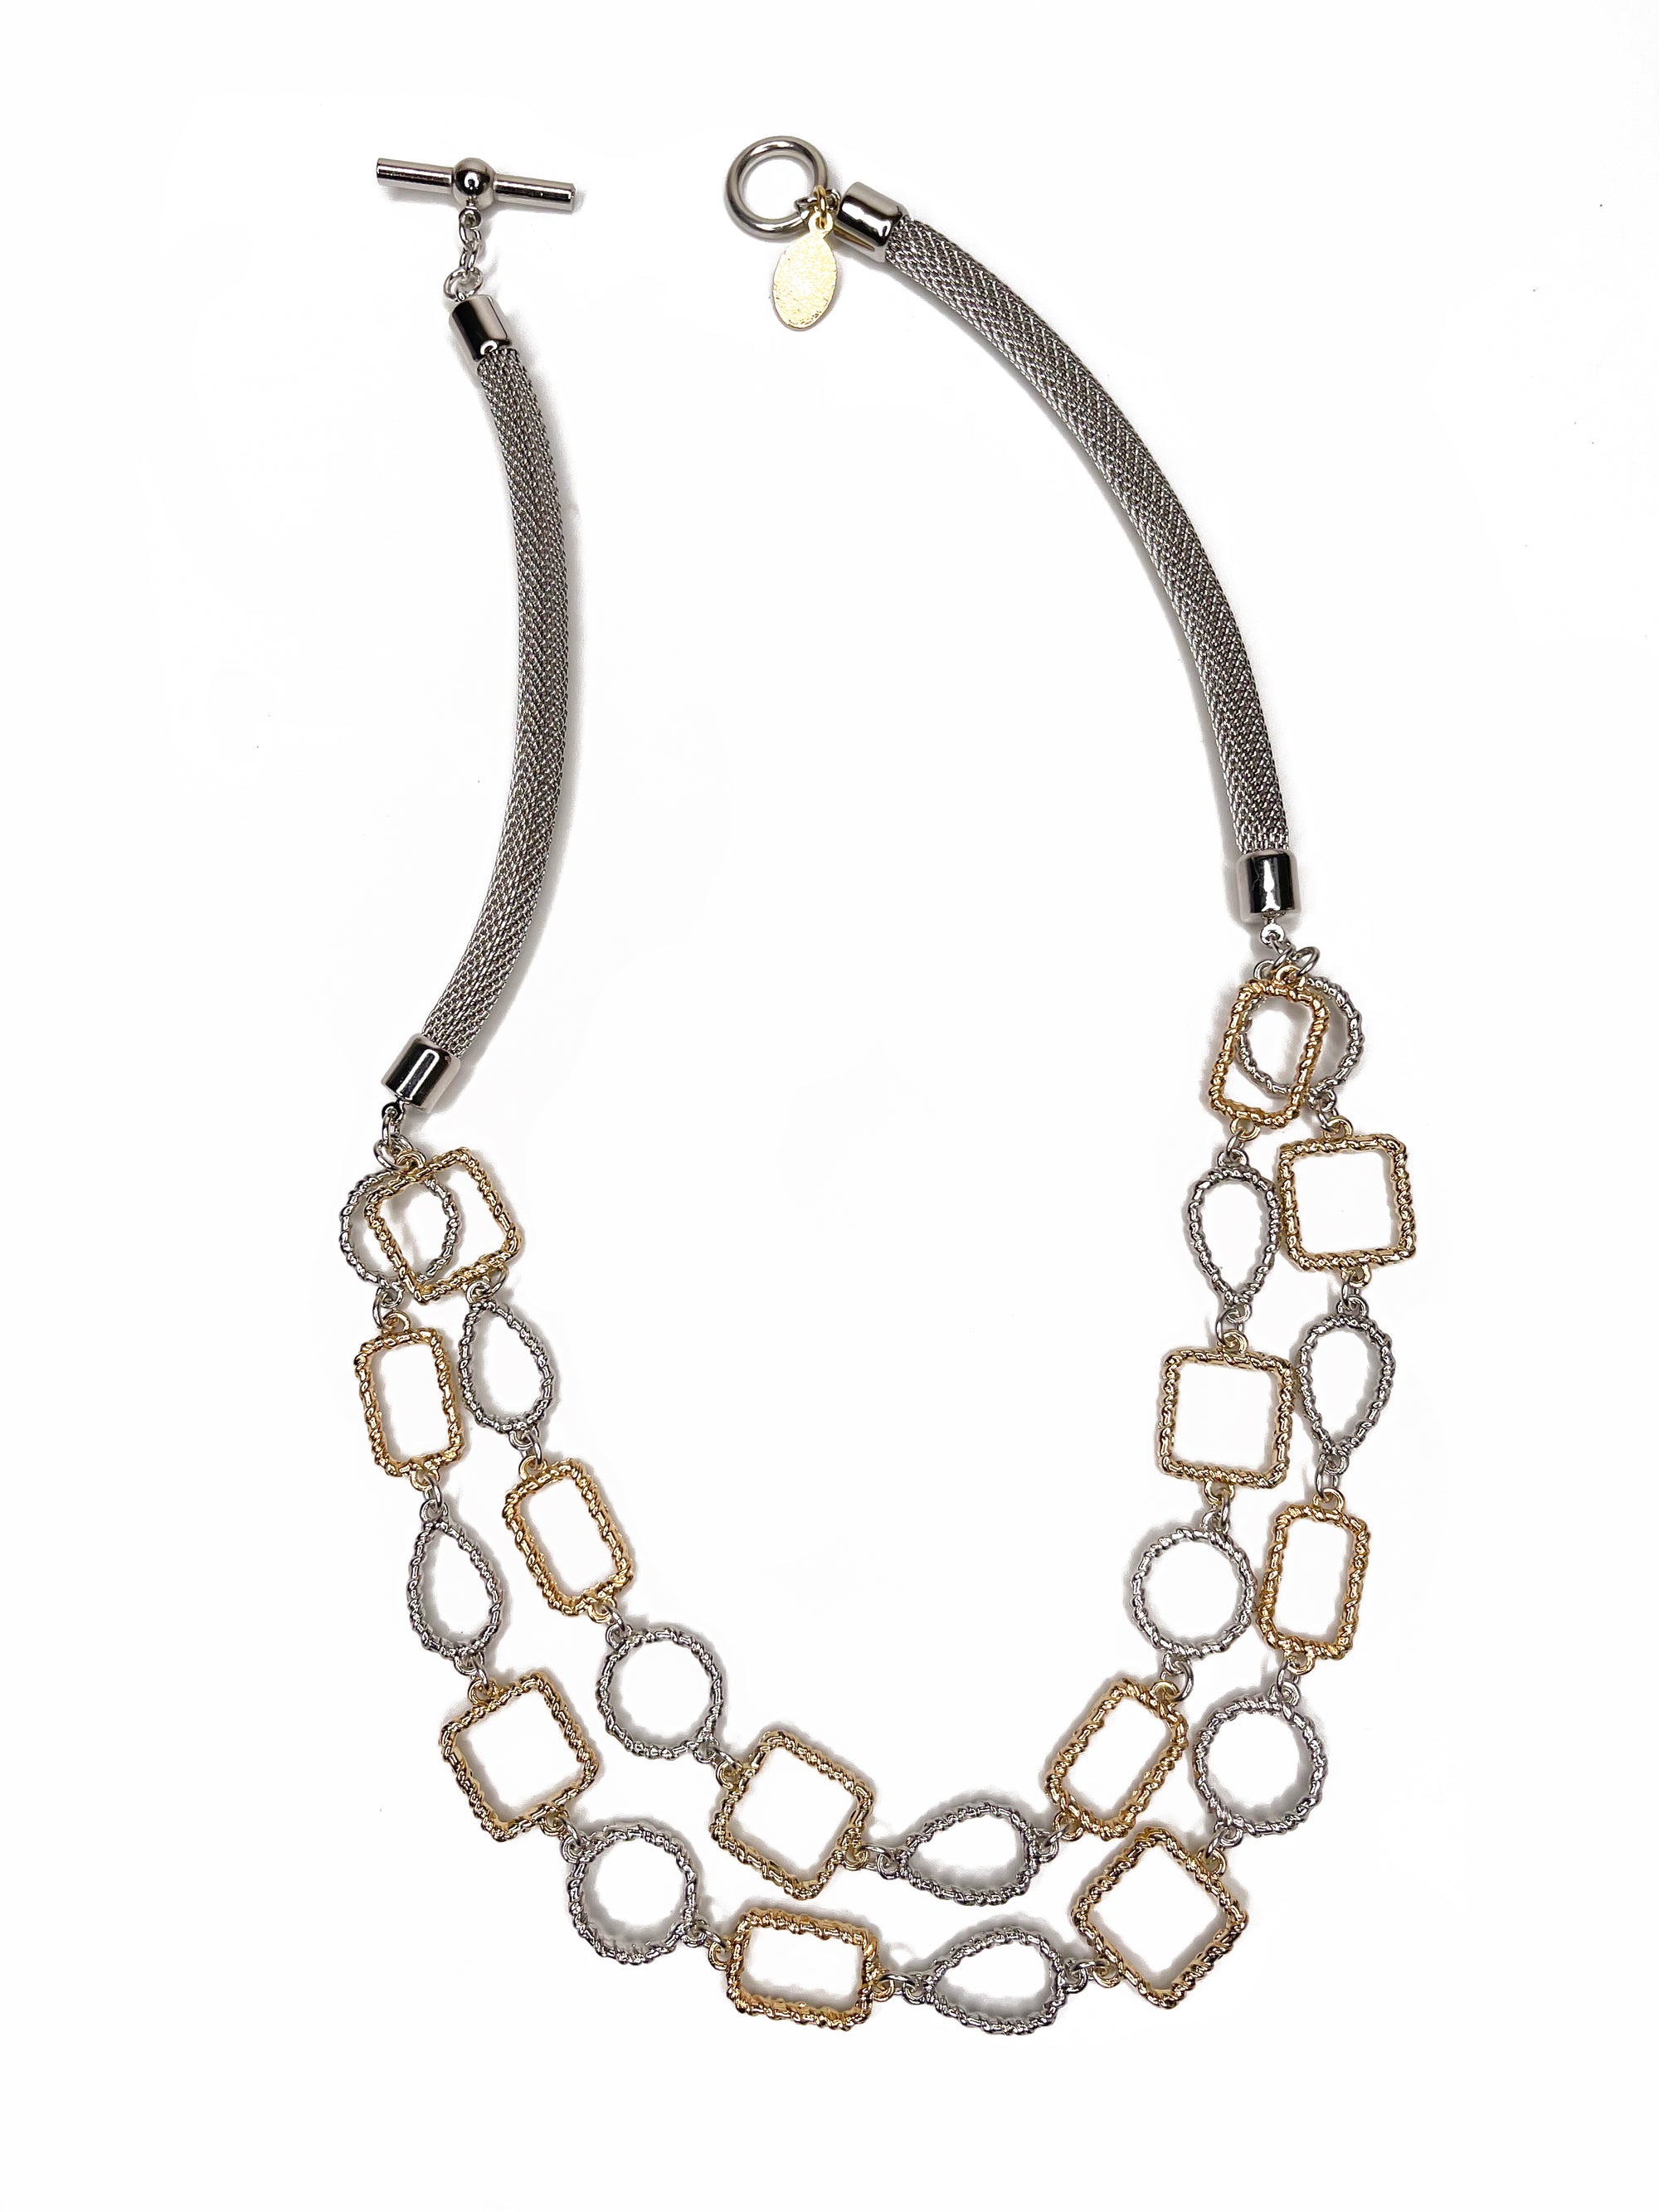 Mesh Necklace with 2-Strands of Geo Shapes